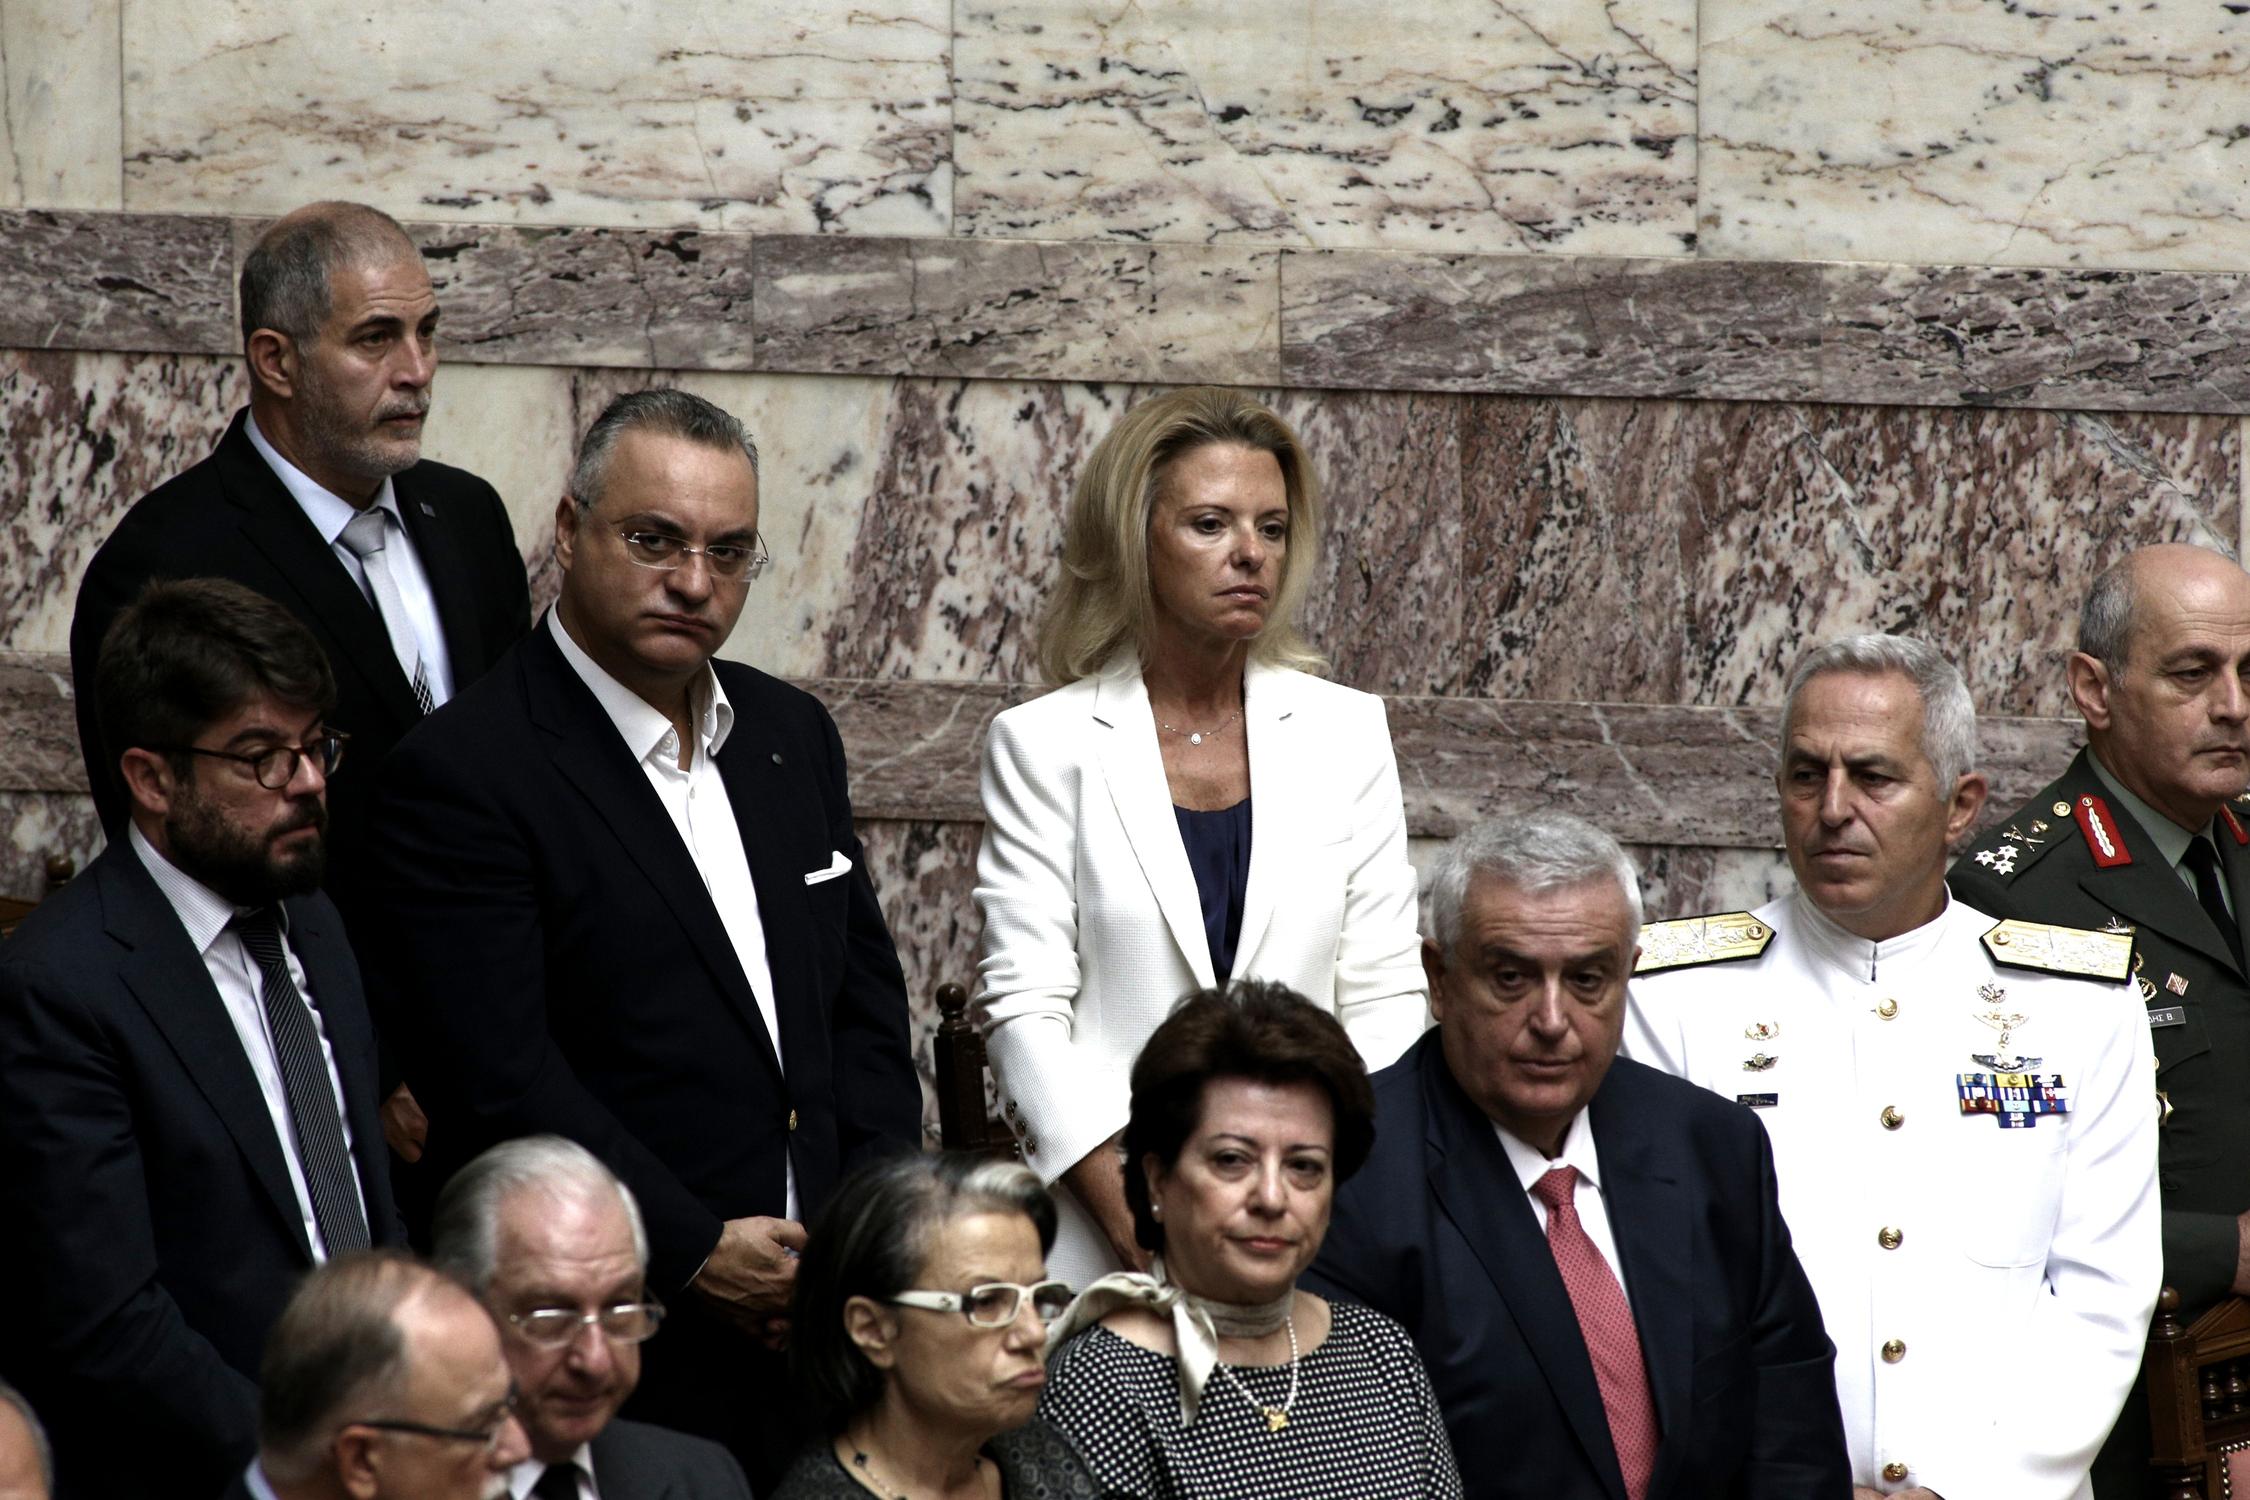 Swearing-in ceremony for the new parliament on Sept. 3 2015 / Ορκωμοσία νέας Βουλής στις 3 Σεπτεμβρίου, 2015